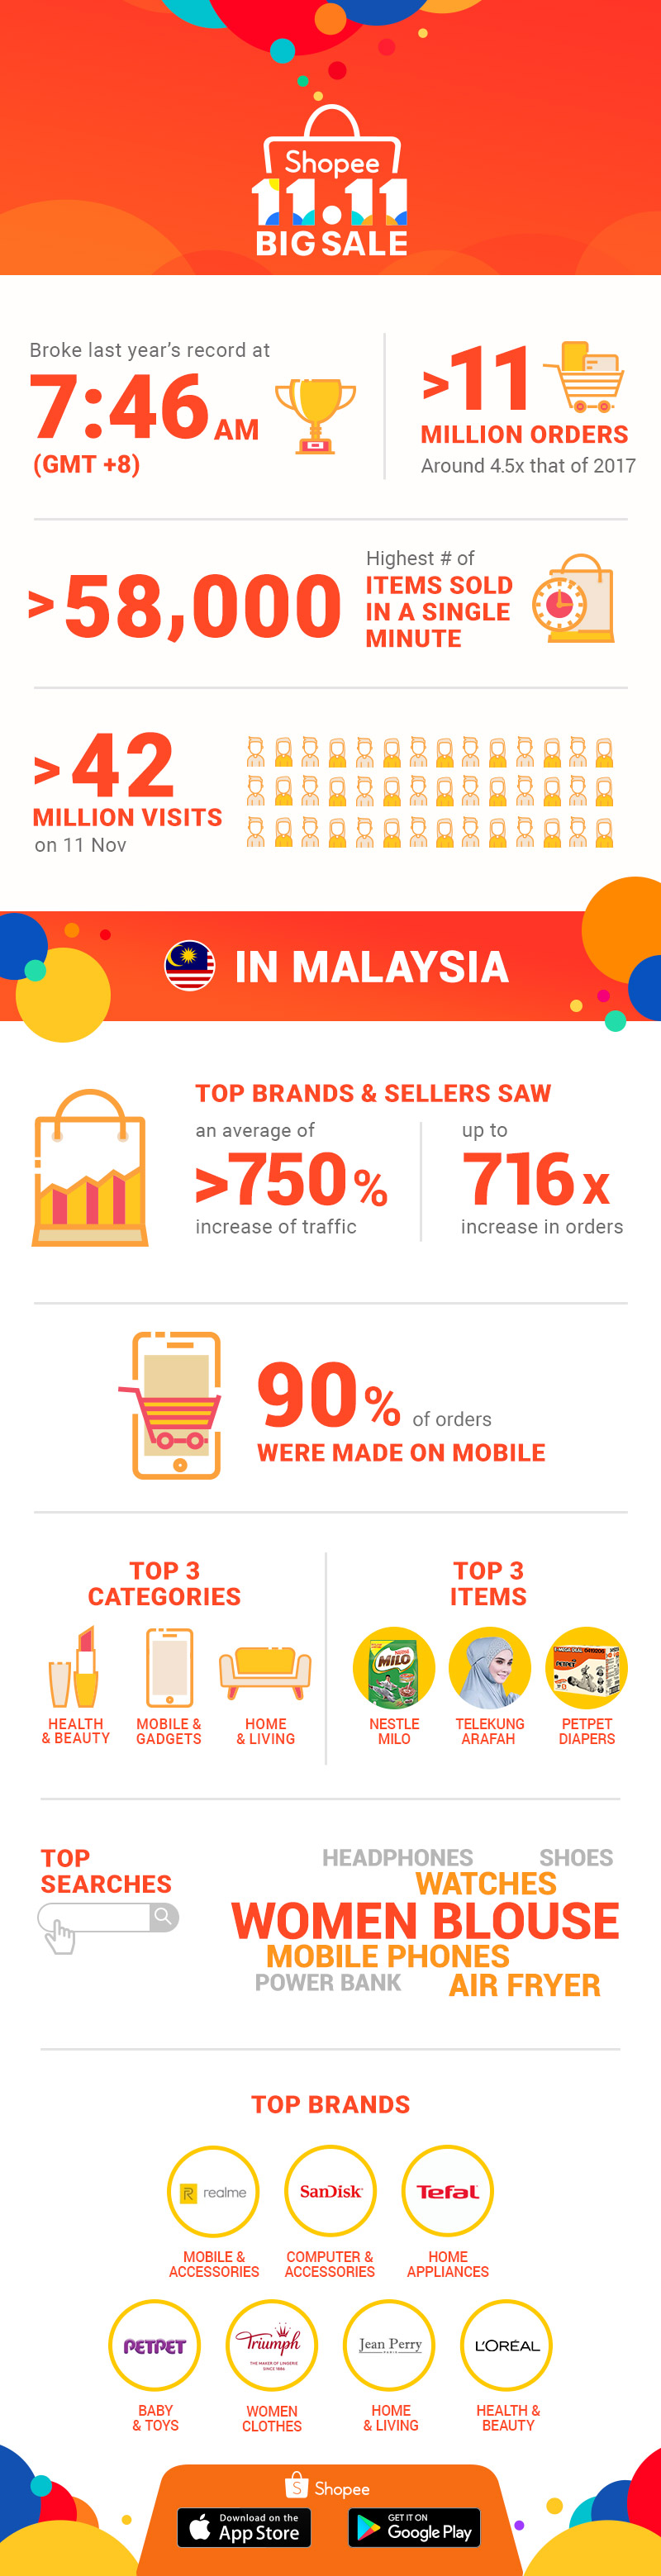 Shopee achieves over 11 million 11.11 orders in 24 hours 1